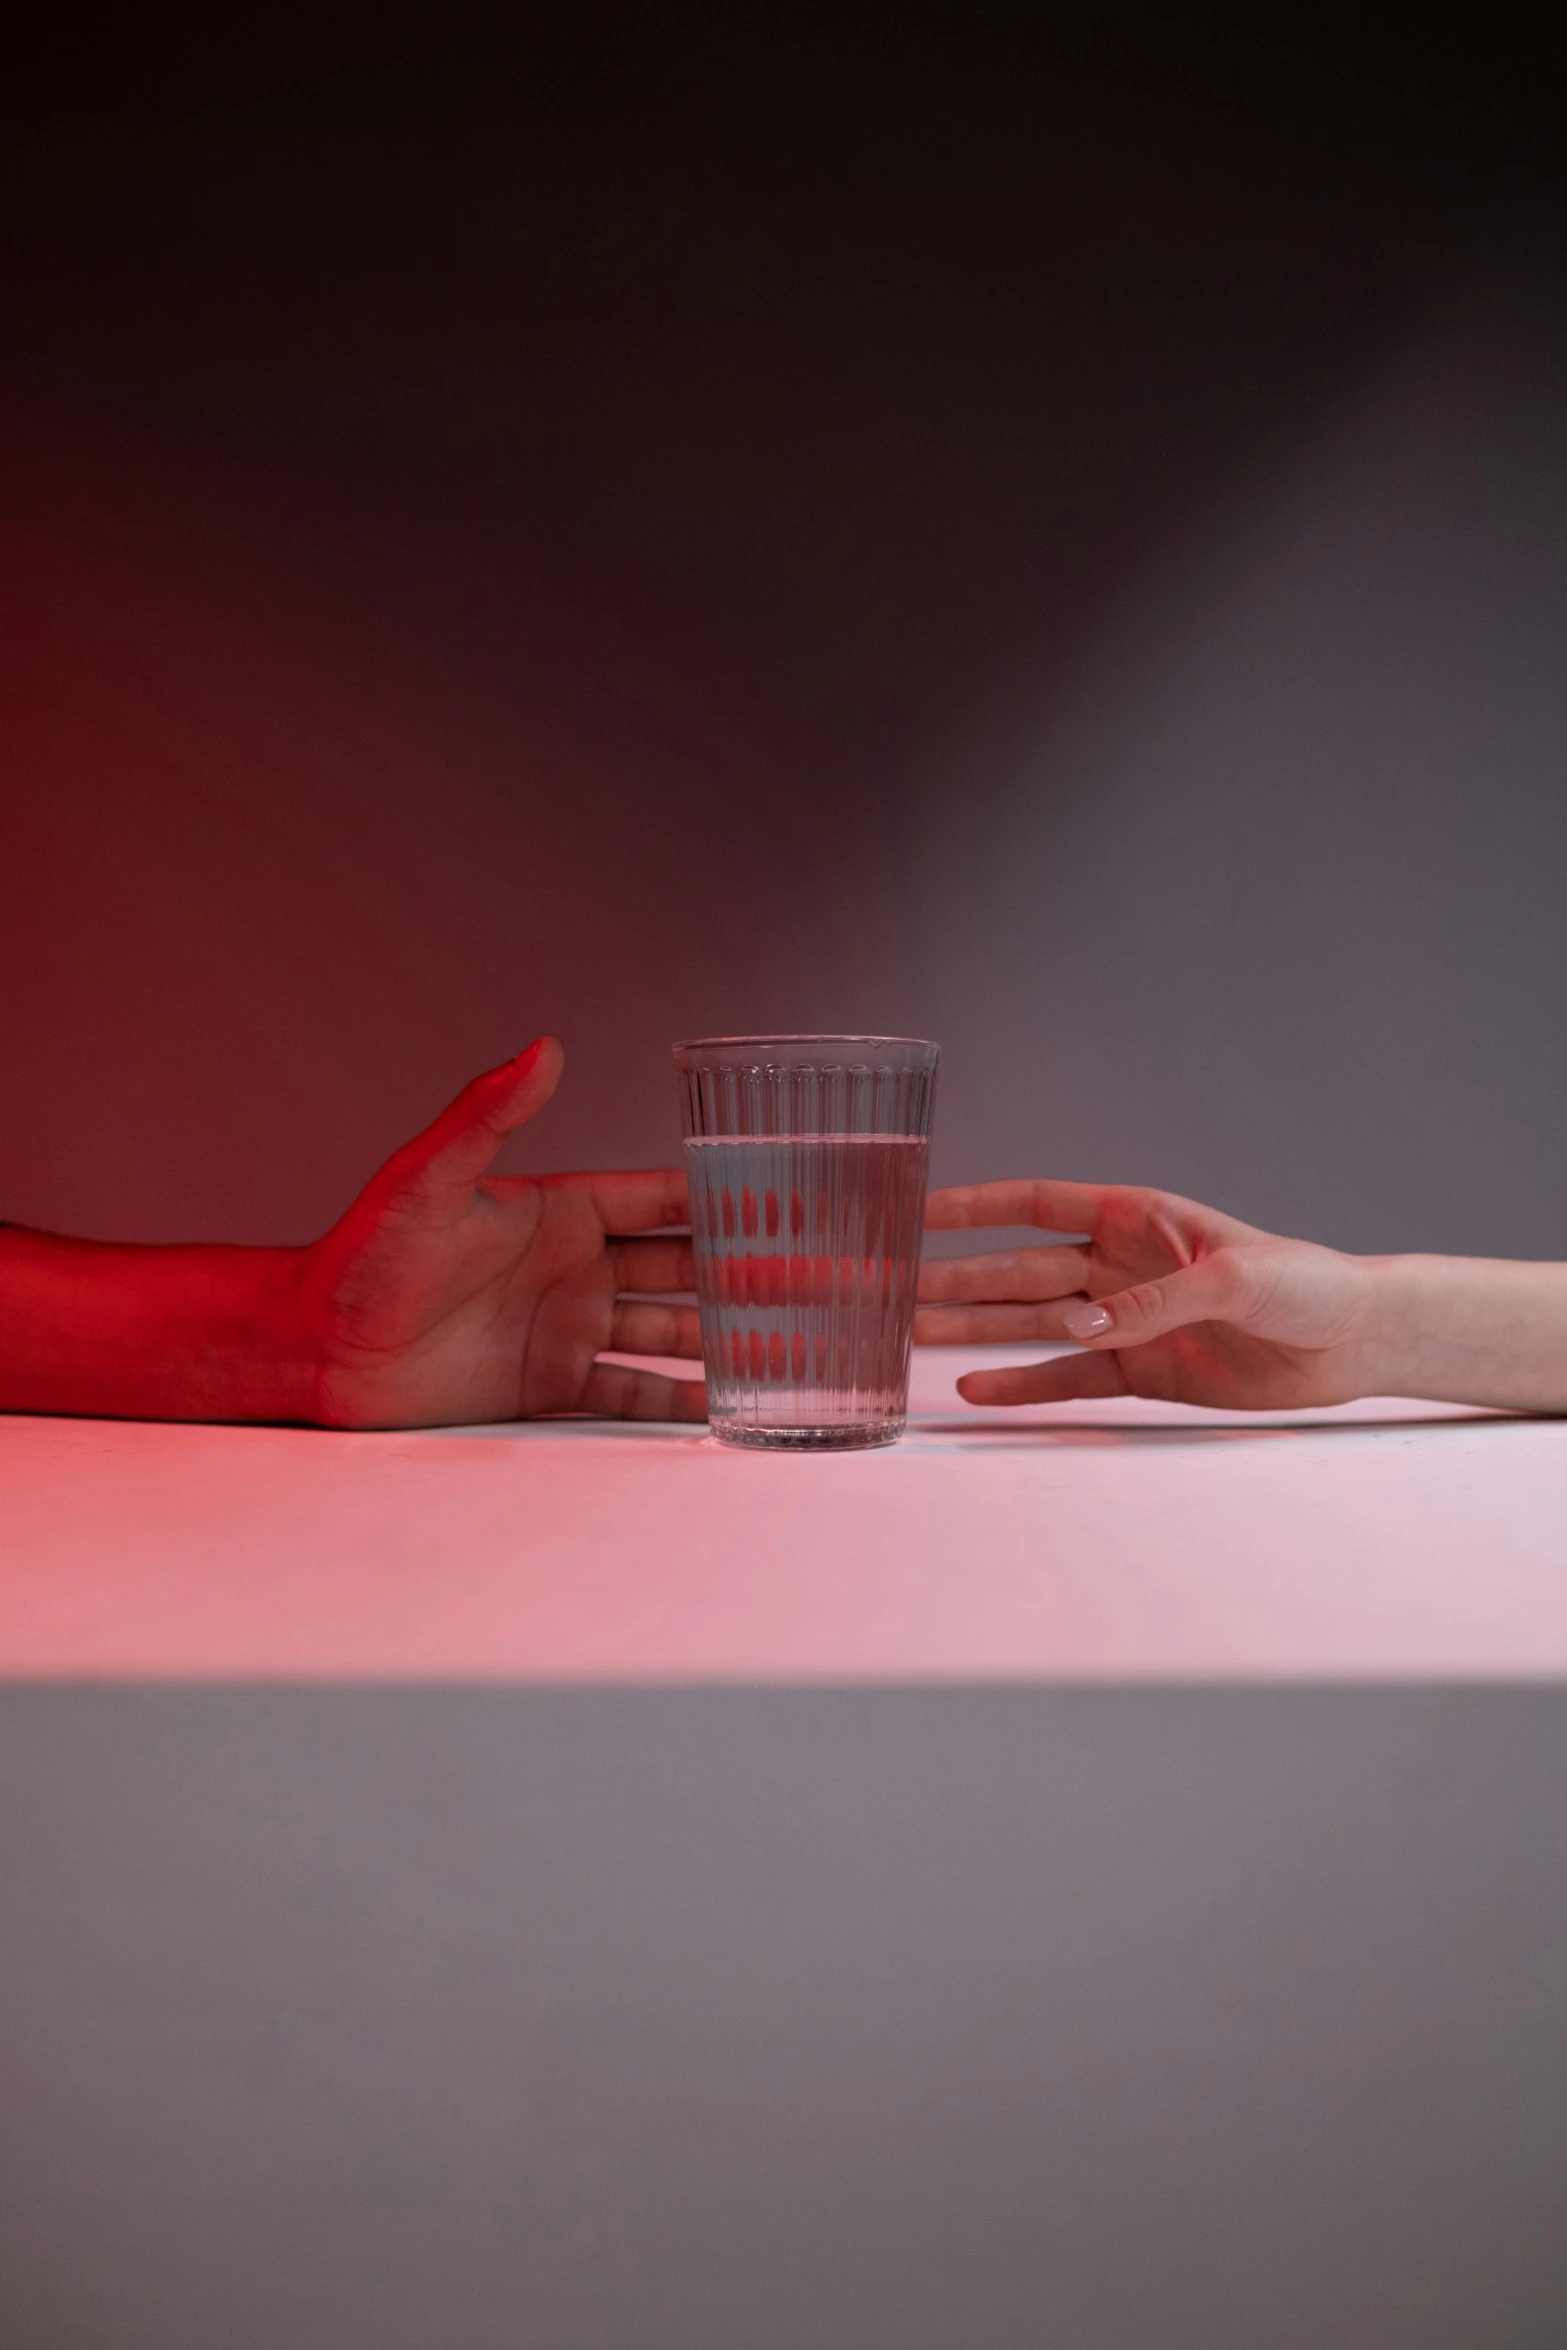 two people are touching their hands while holding a glass